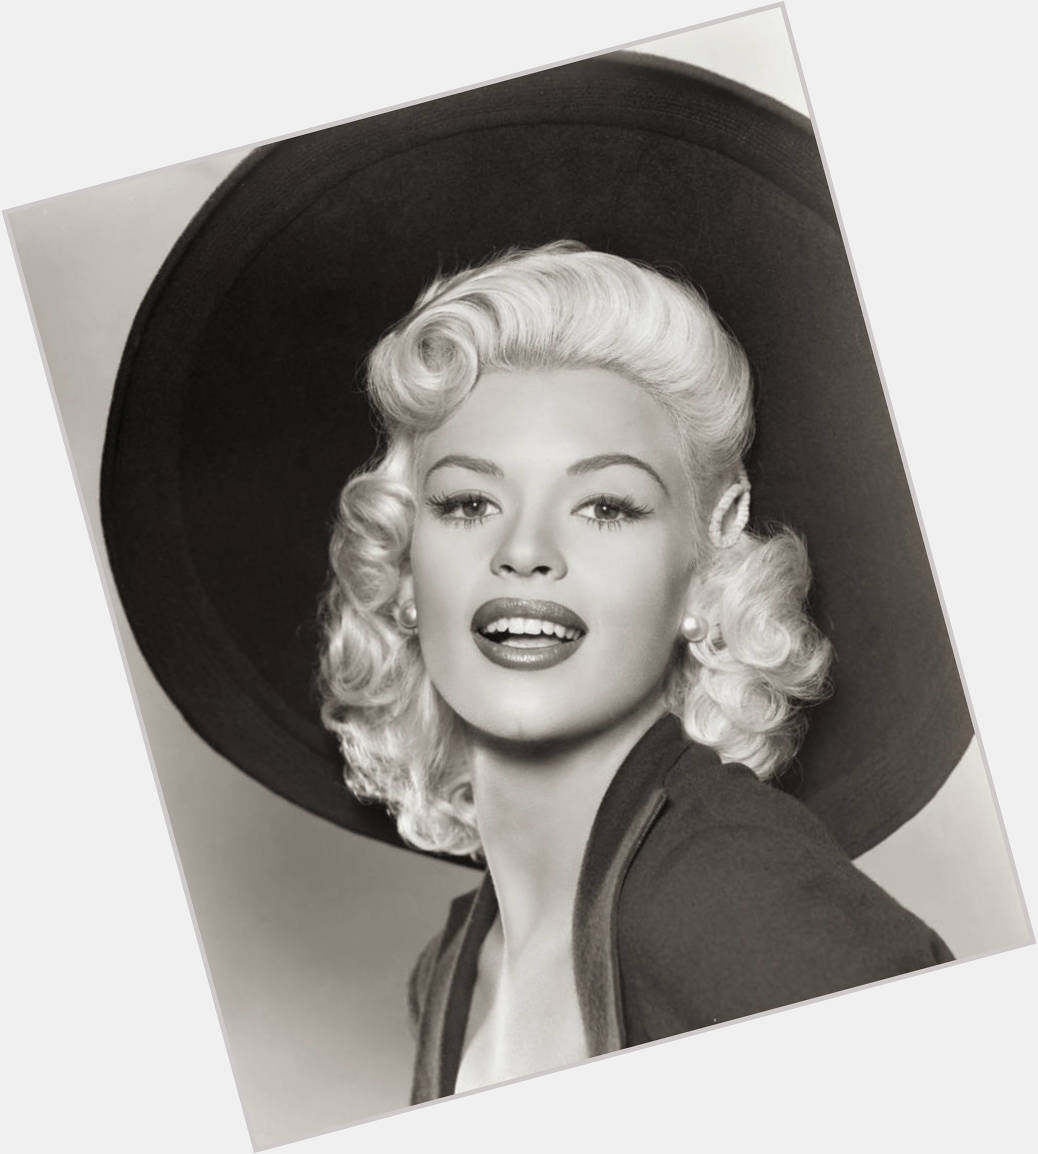 Happy Birthday to the beautiful Jayne Mansfield! Born on this day in 1933 